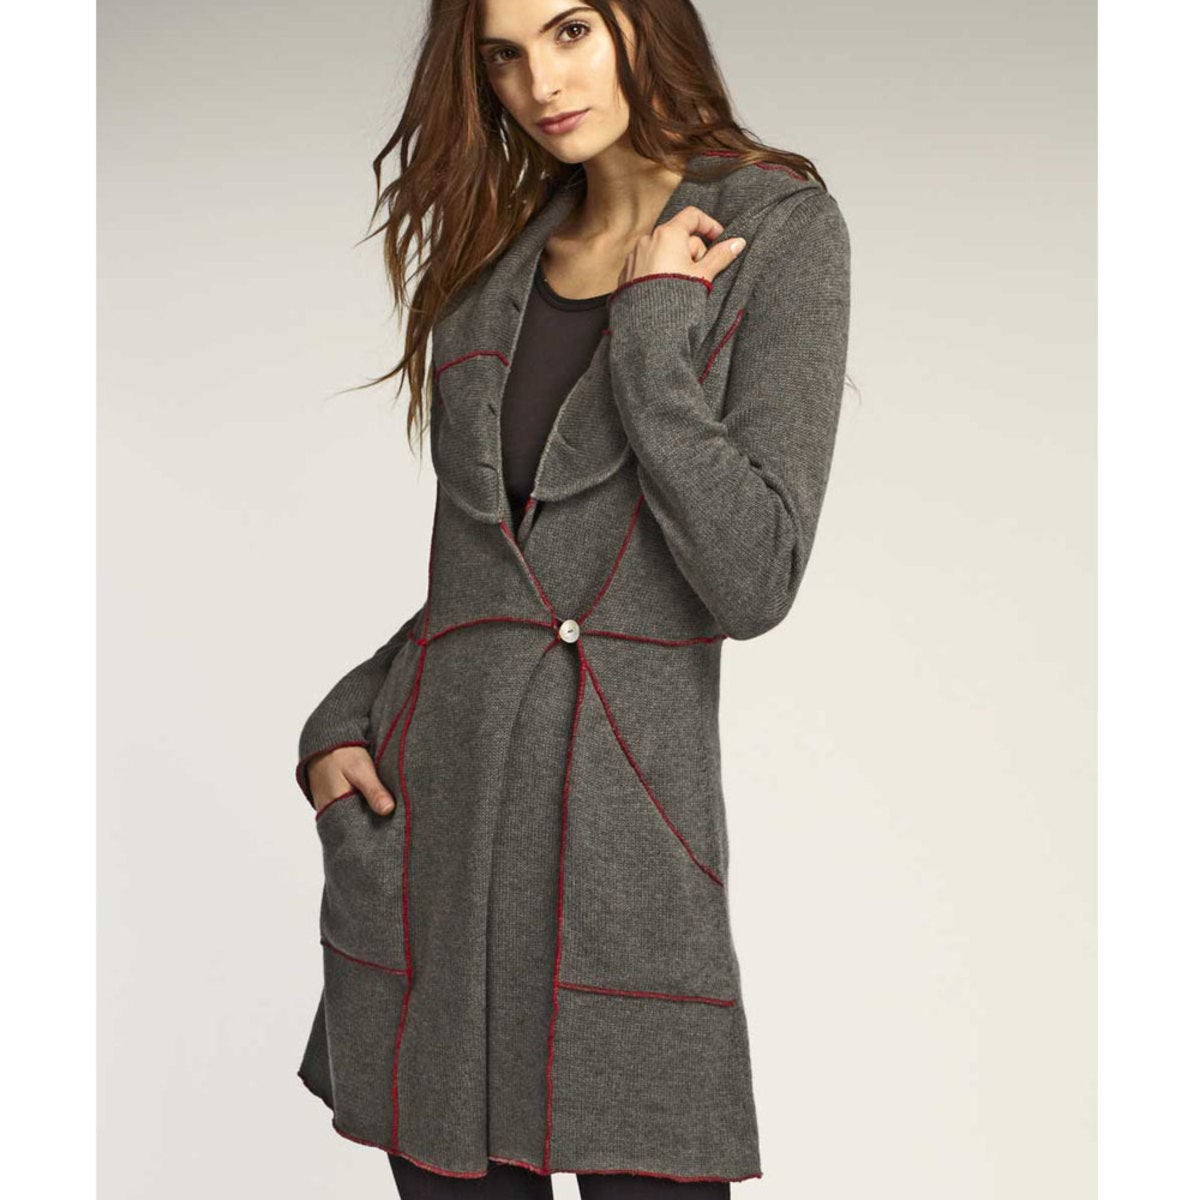 Chateau Luxe Coat (large 12-14) - Ash - S (4-6)